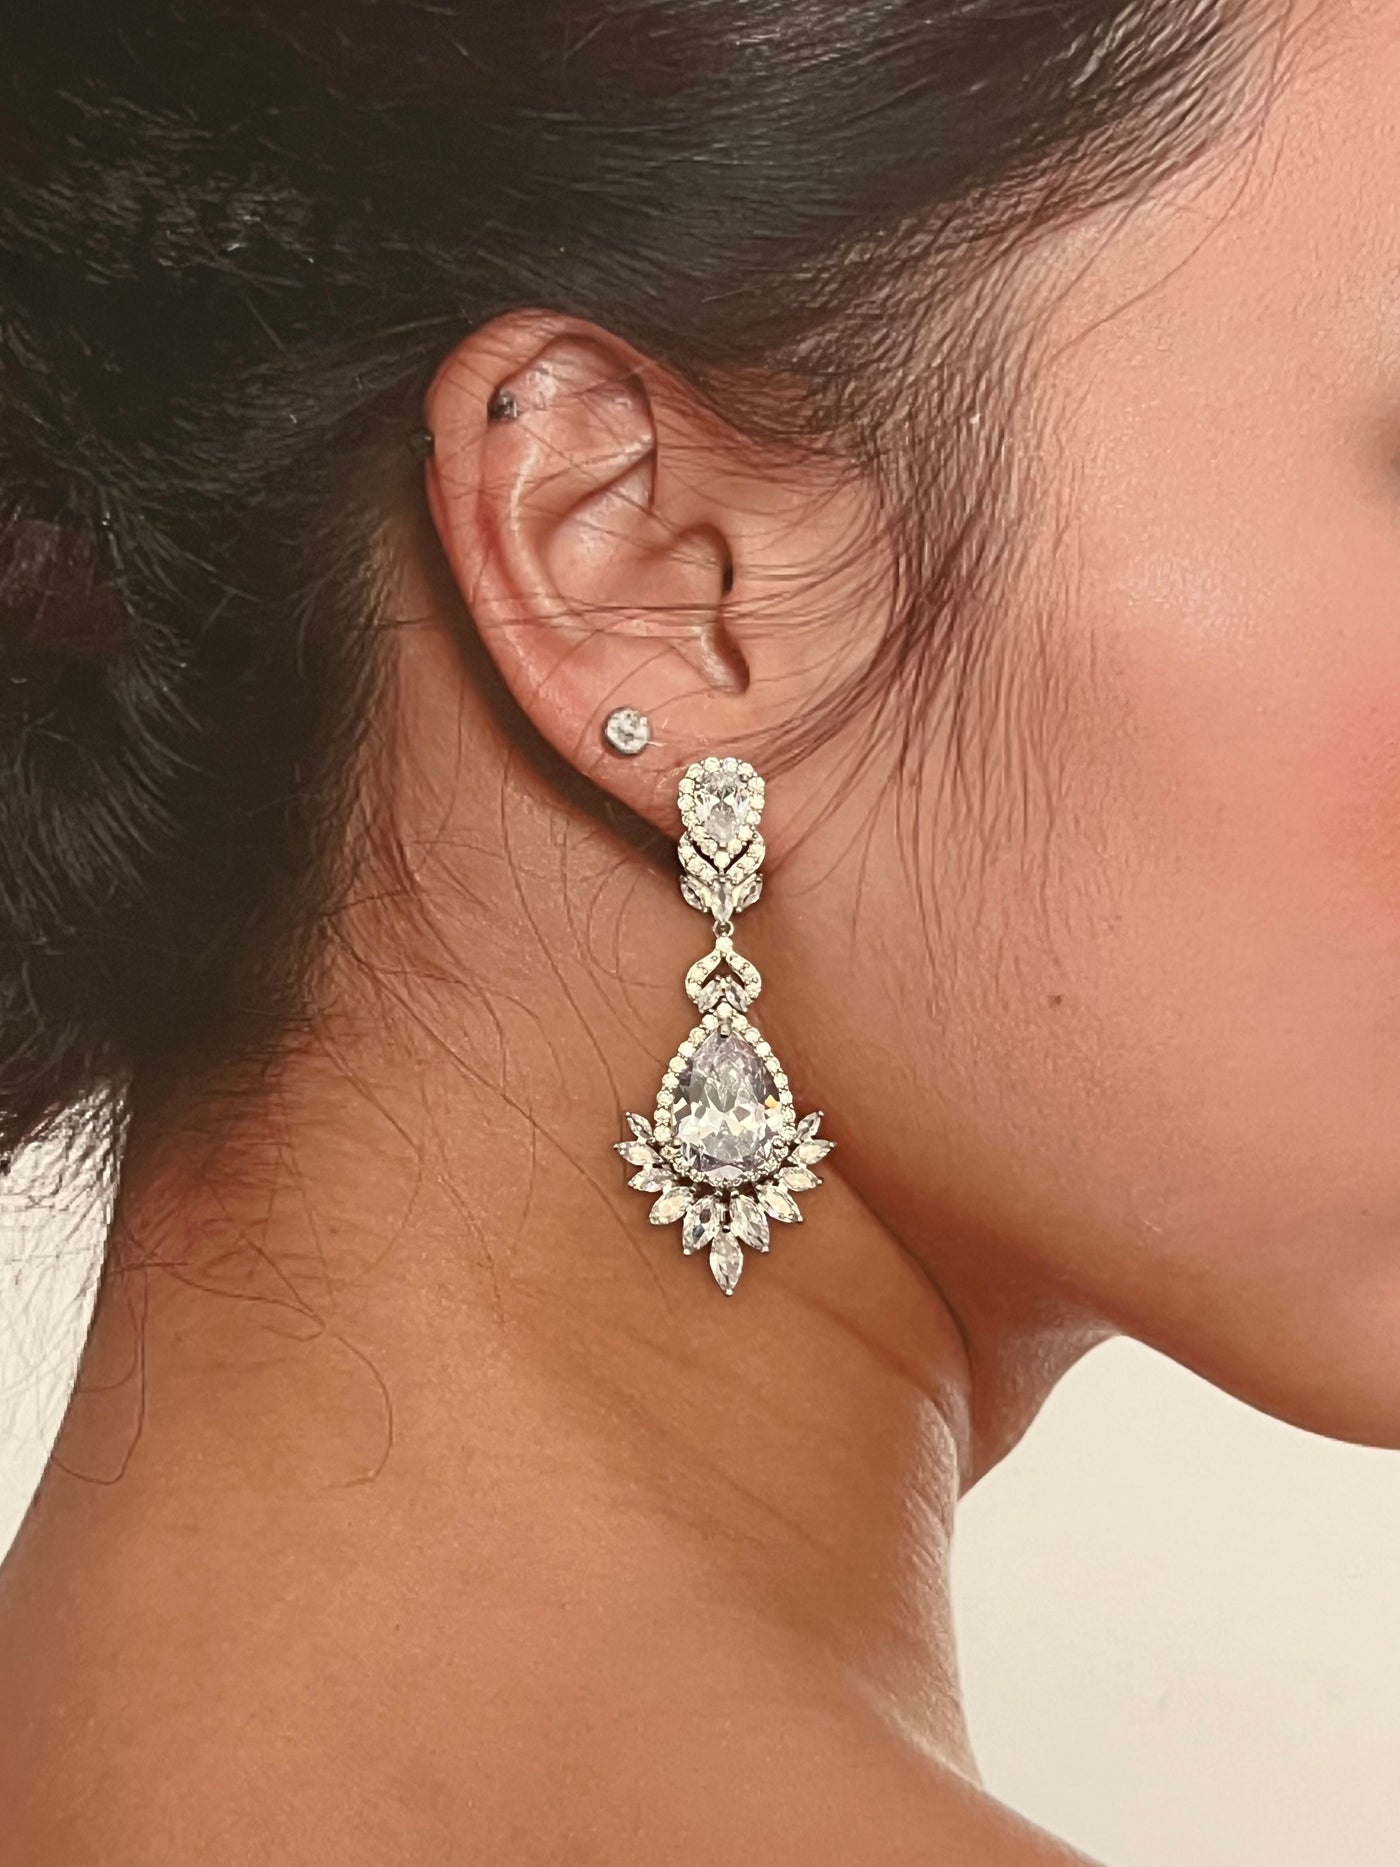 Bridal Earrings, Swarovski and Zirconia Wedding jewelry, Luxury Drop Earring from Lucky Collections